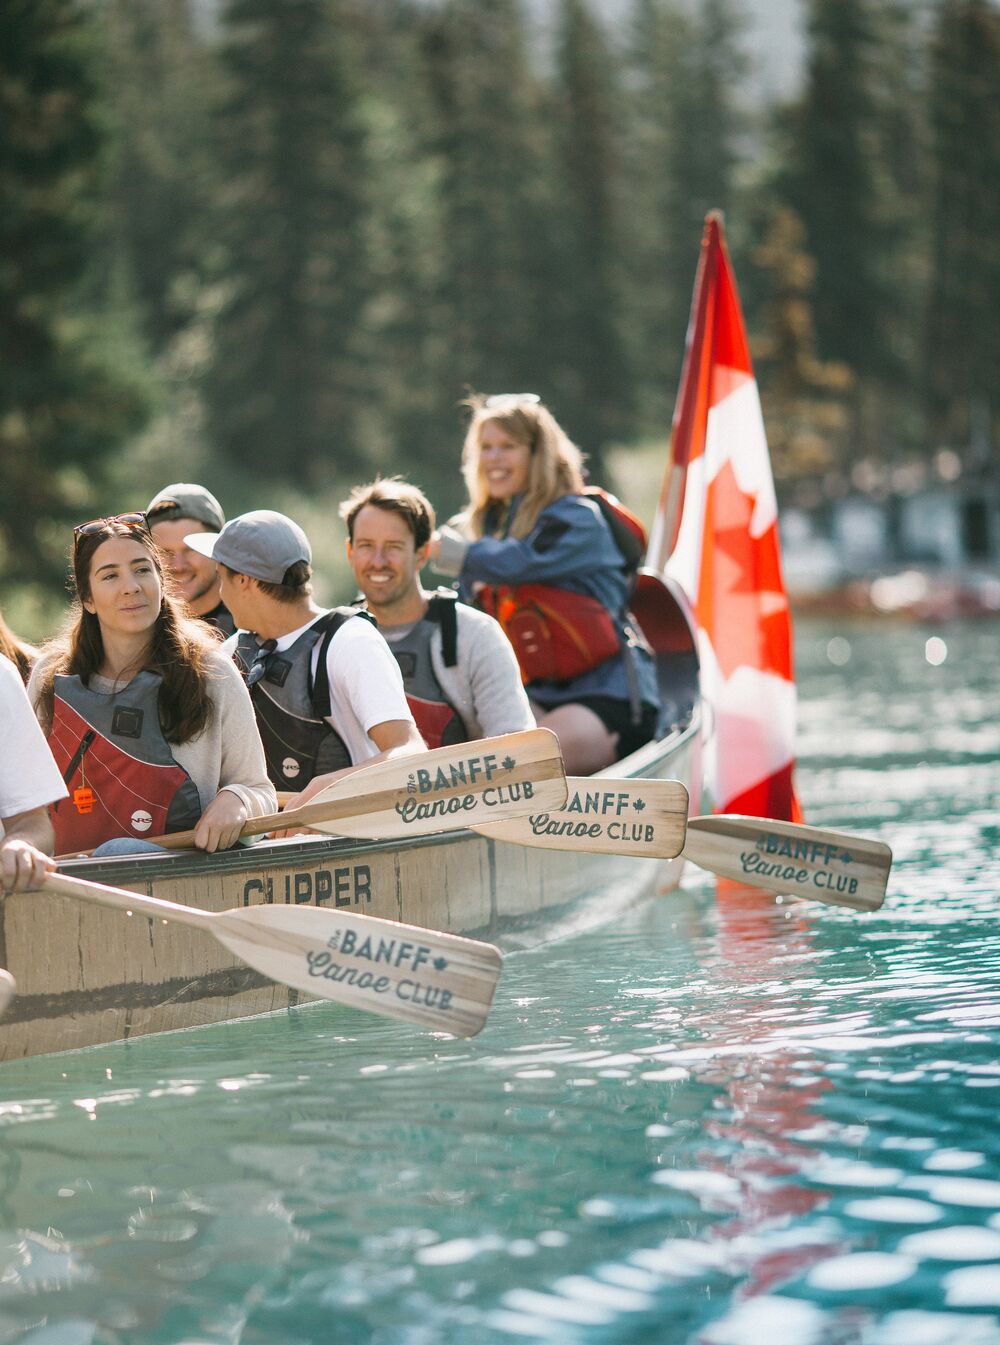 People in an old wooden canoe from Banff Canoe Club on the Bow River in Banff.